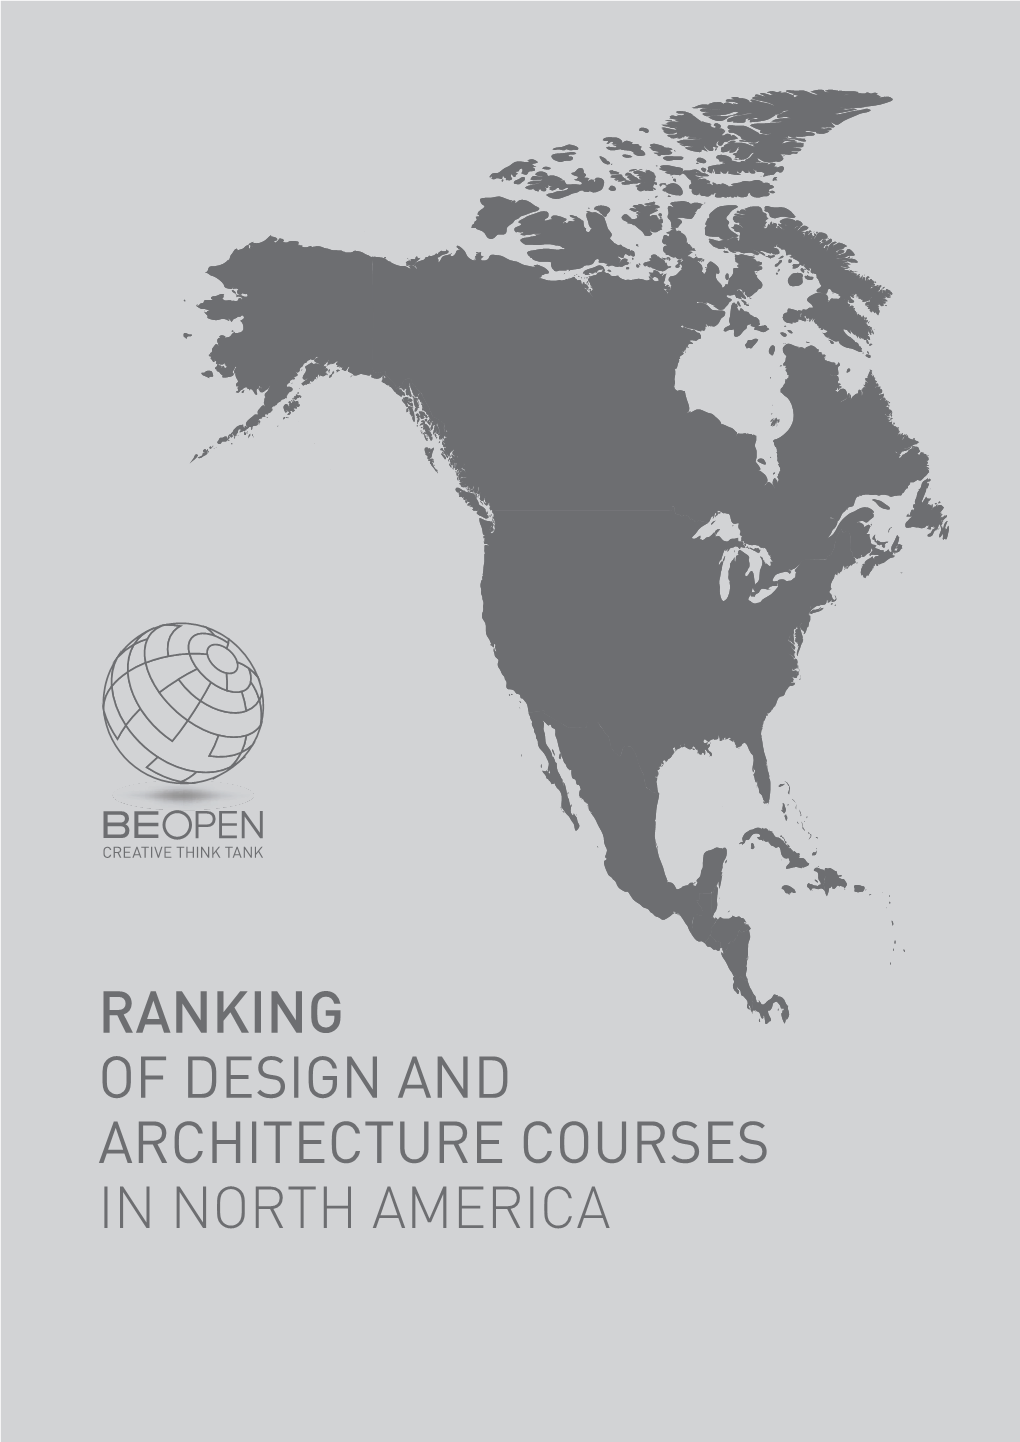 Ranking of Design and Architecture Courses In